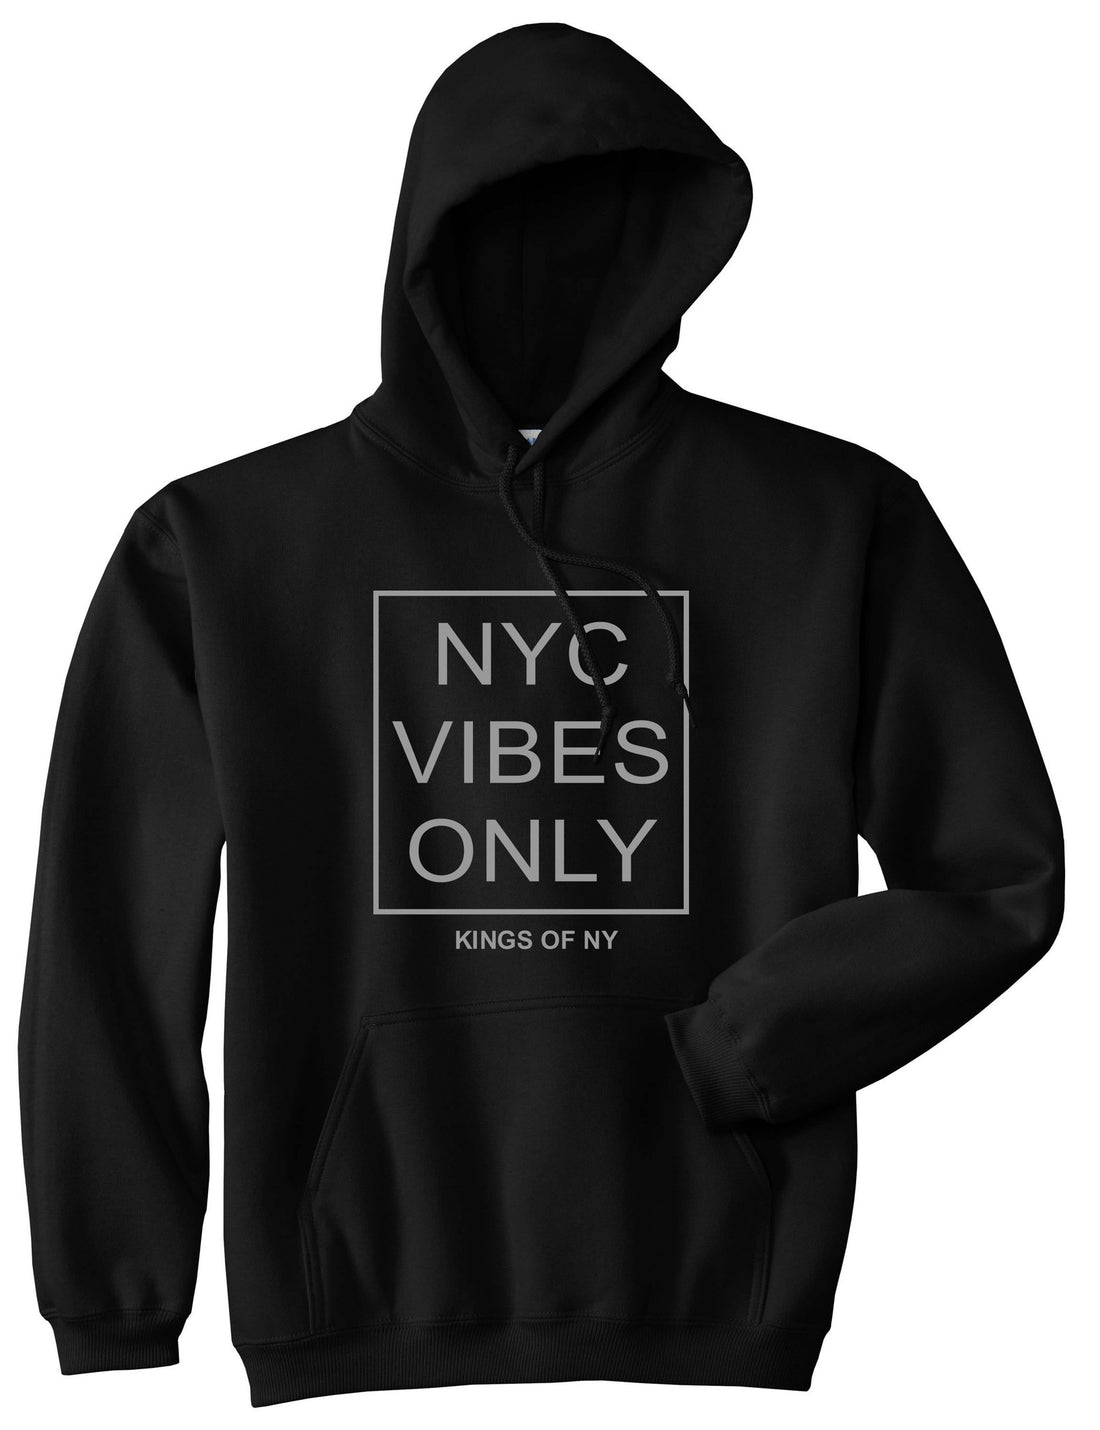 NYC Vibes Only Good Pullover Hoodie